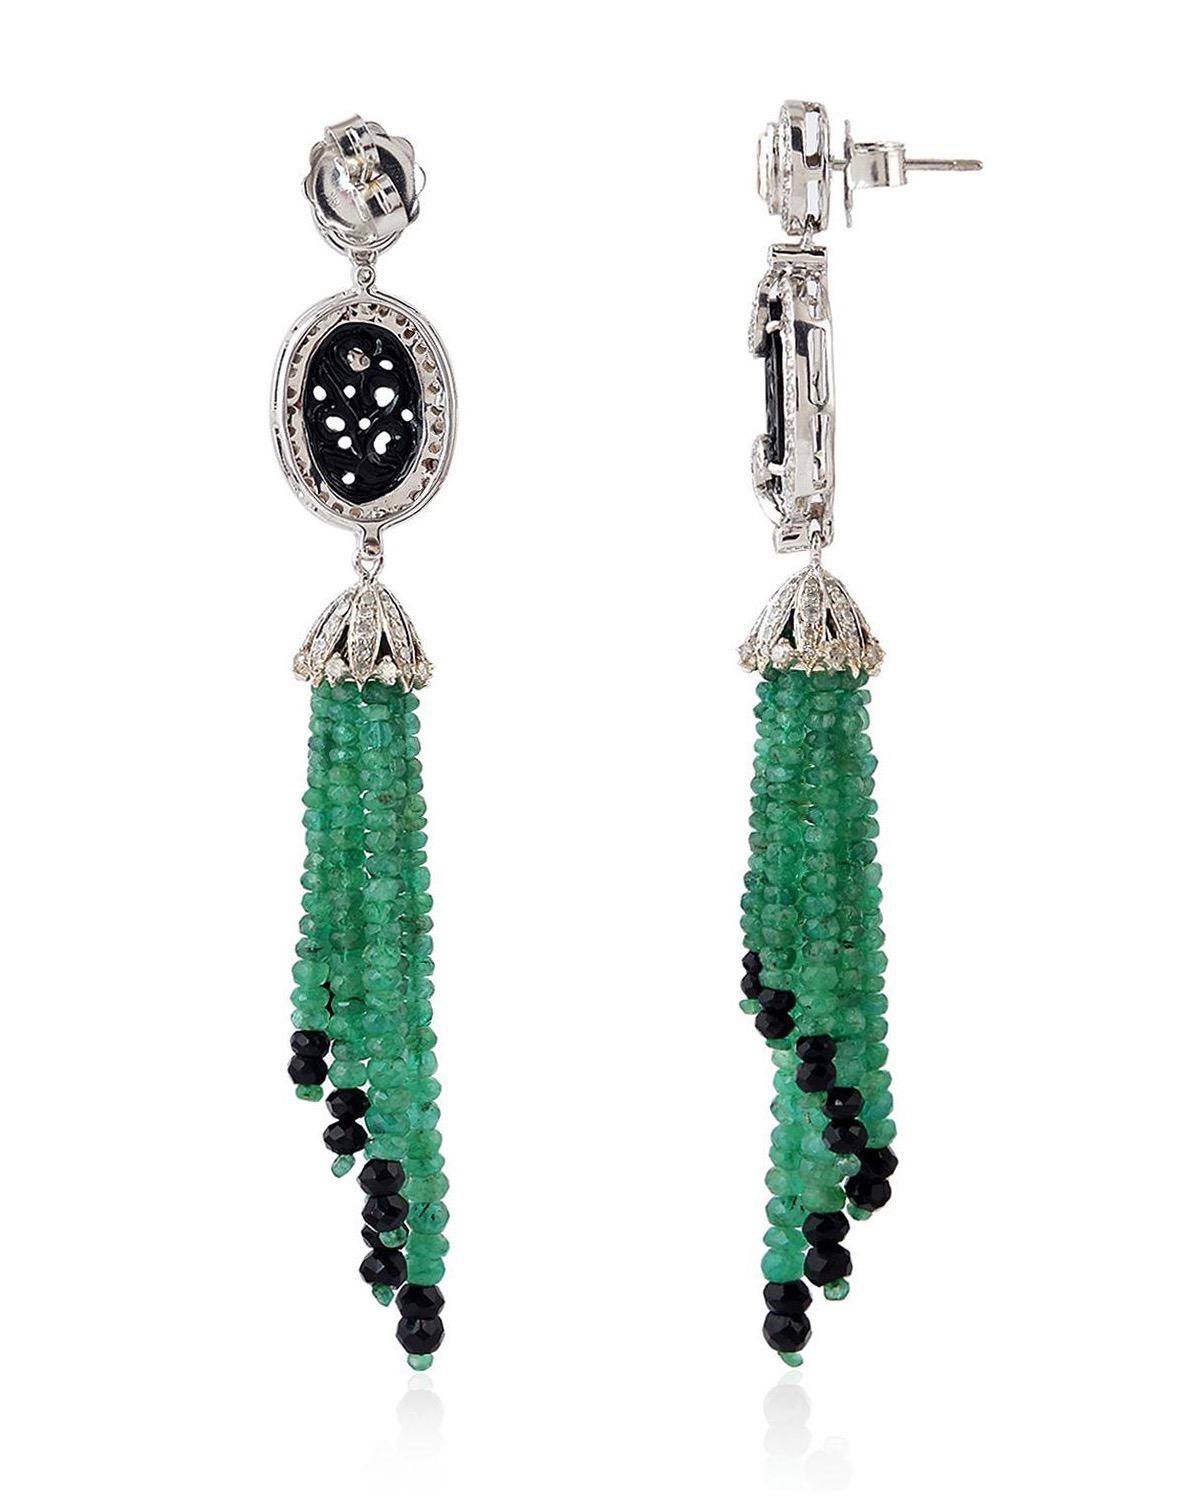 These stunning tassel earrings are handmade in 18-karat gold. It is set with 28.3 carats emerald, 10.24 carats onyx and 2.21 carats of glittering diamonds. 

FOLLOW  MEGHNA JEWELS storefront to view the latest collection & exclusive pieces.  Meghna